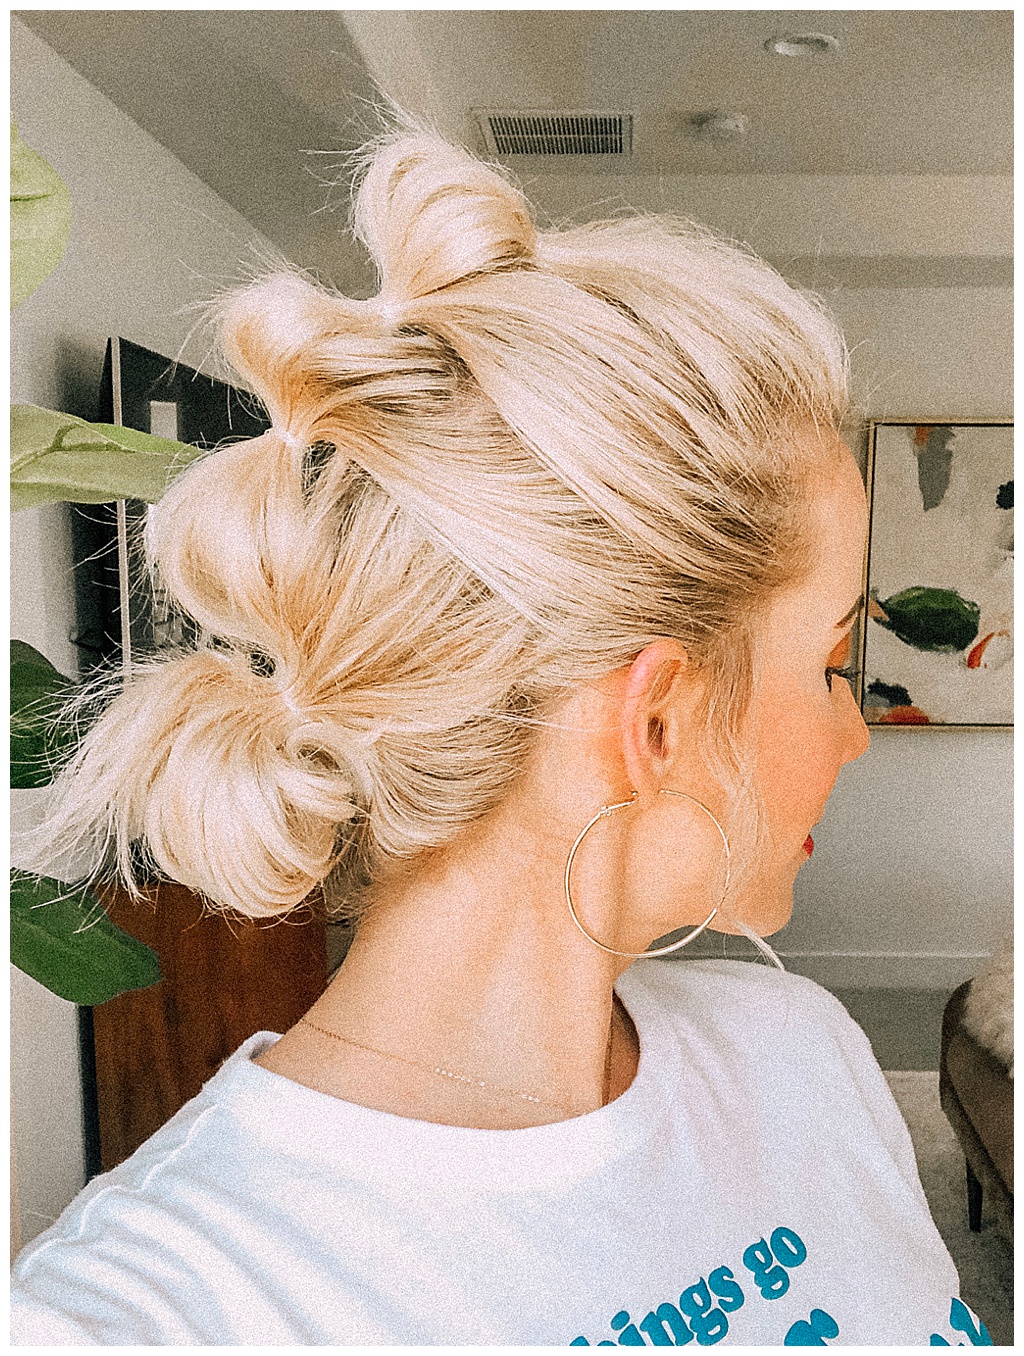 Long Hair & Beauty Tips - Hi! Please check out our new Long Hair Tips post  (THE ULTIMATE FESTIVAL/COACHELLA HAIRSTYLES | Cute & Easy Summer Hairstyles  for Short & Long Hair) which